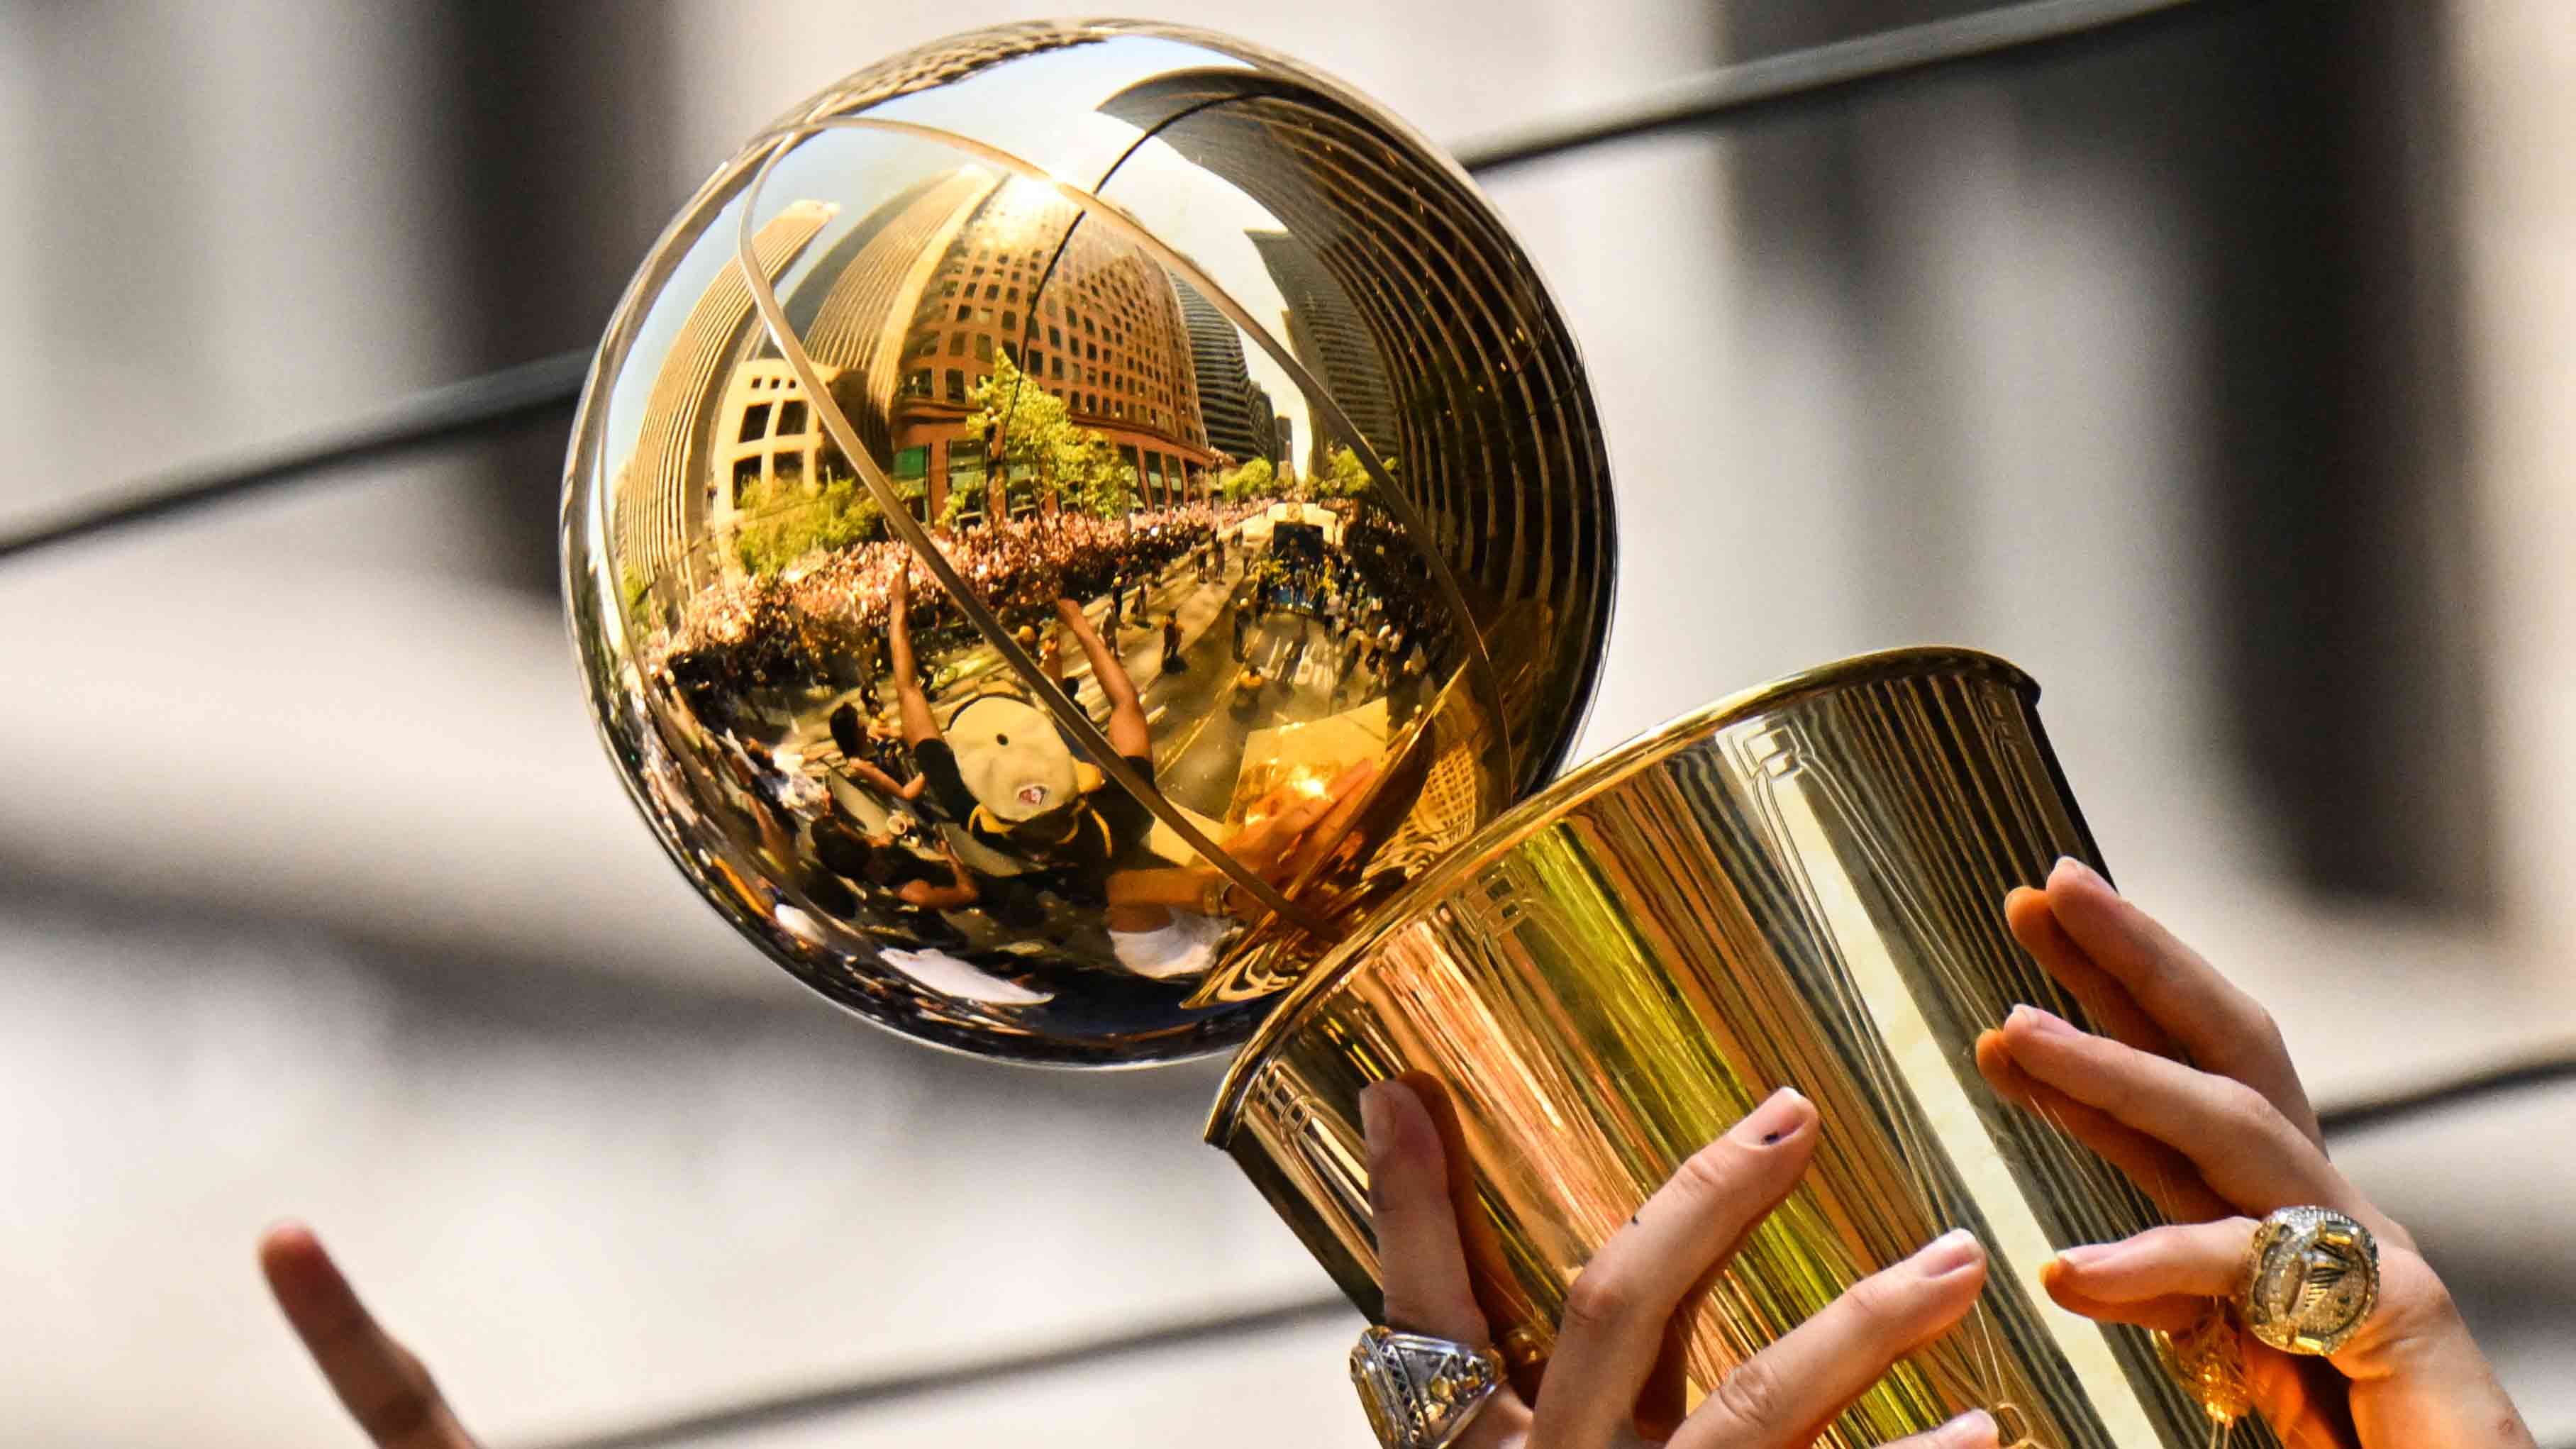 Larry O'Brien Trophy Facts: Origin, Height, Weight and More – NBC